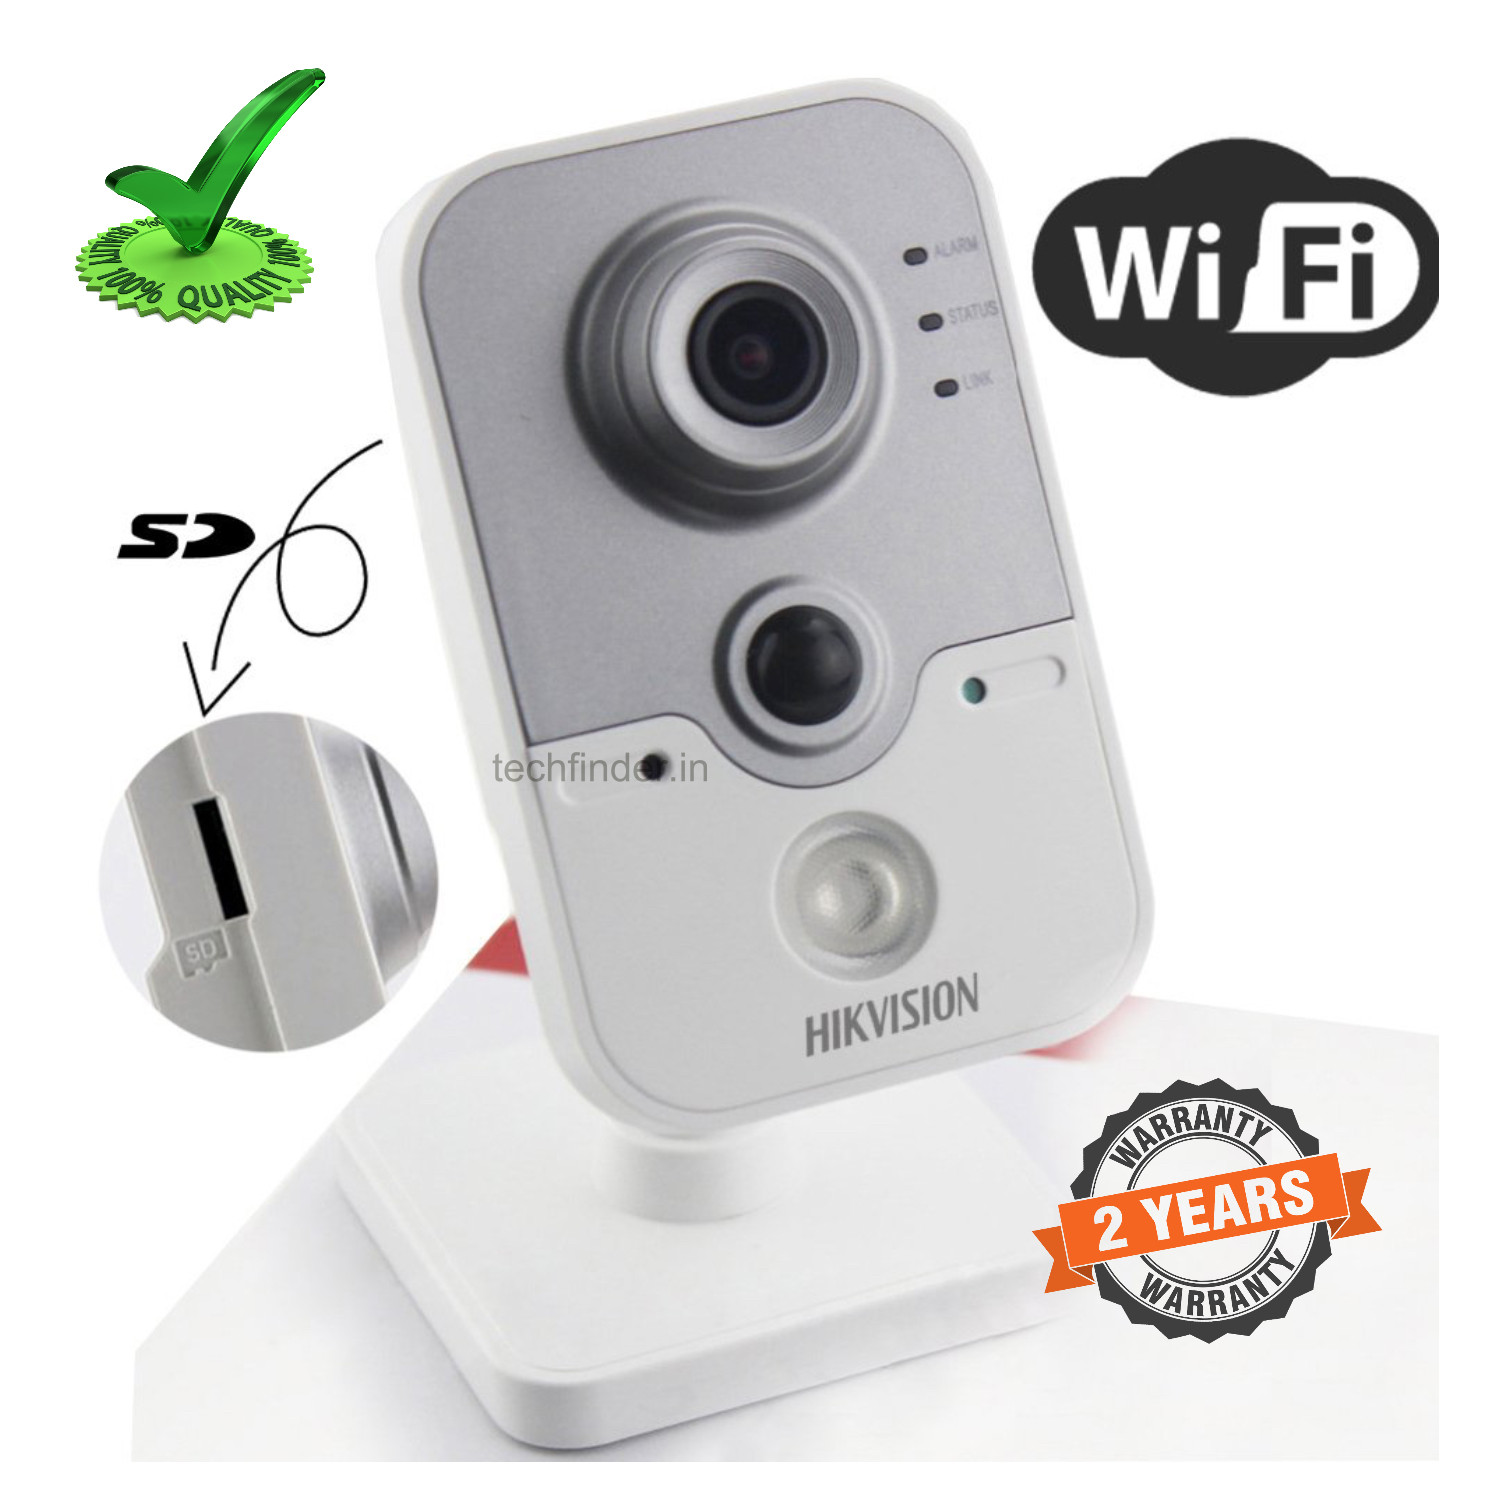 Hikvision DS-2CD2442FWD-IW 4megapixel WDR Wi-Fi Network Cube Camera